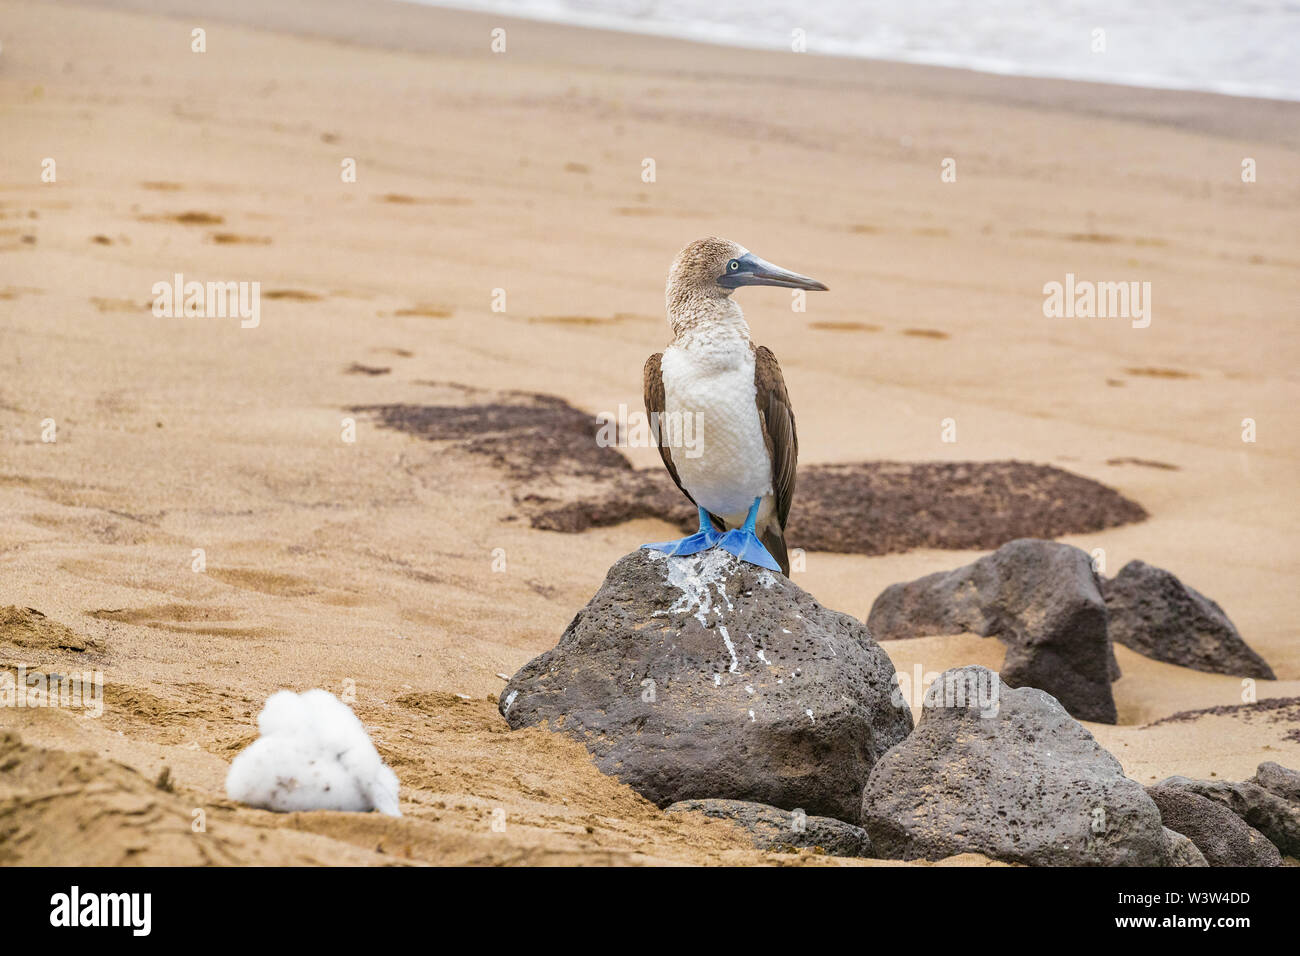 Galapagos animals: Blue-footed Booby - Iconic famous galapagos wildlife Stock Photo